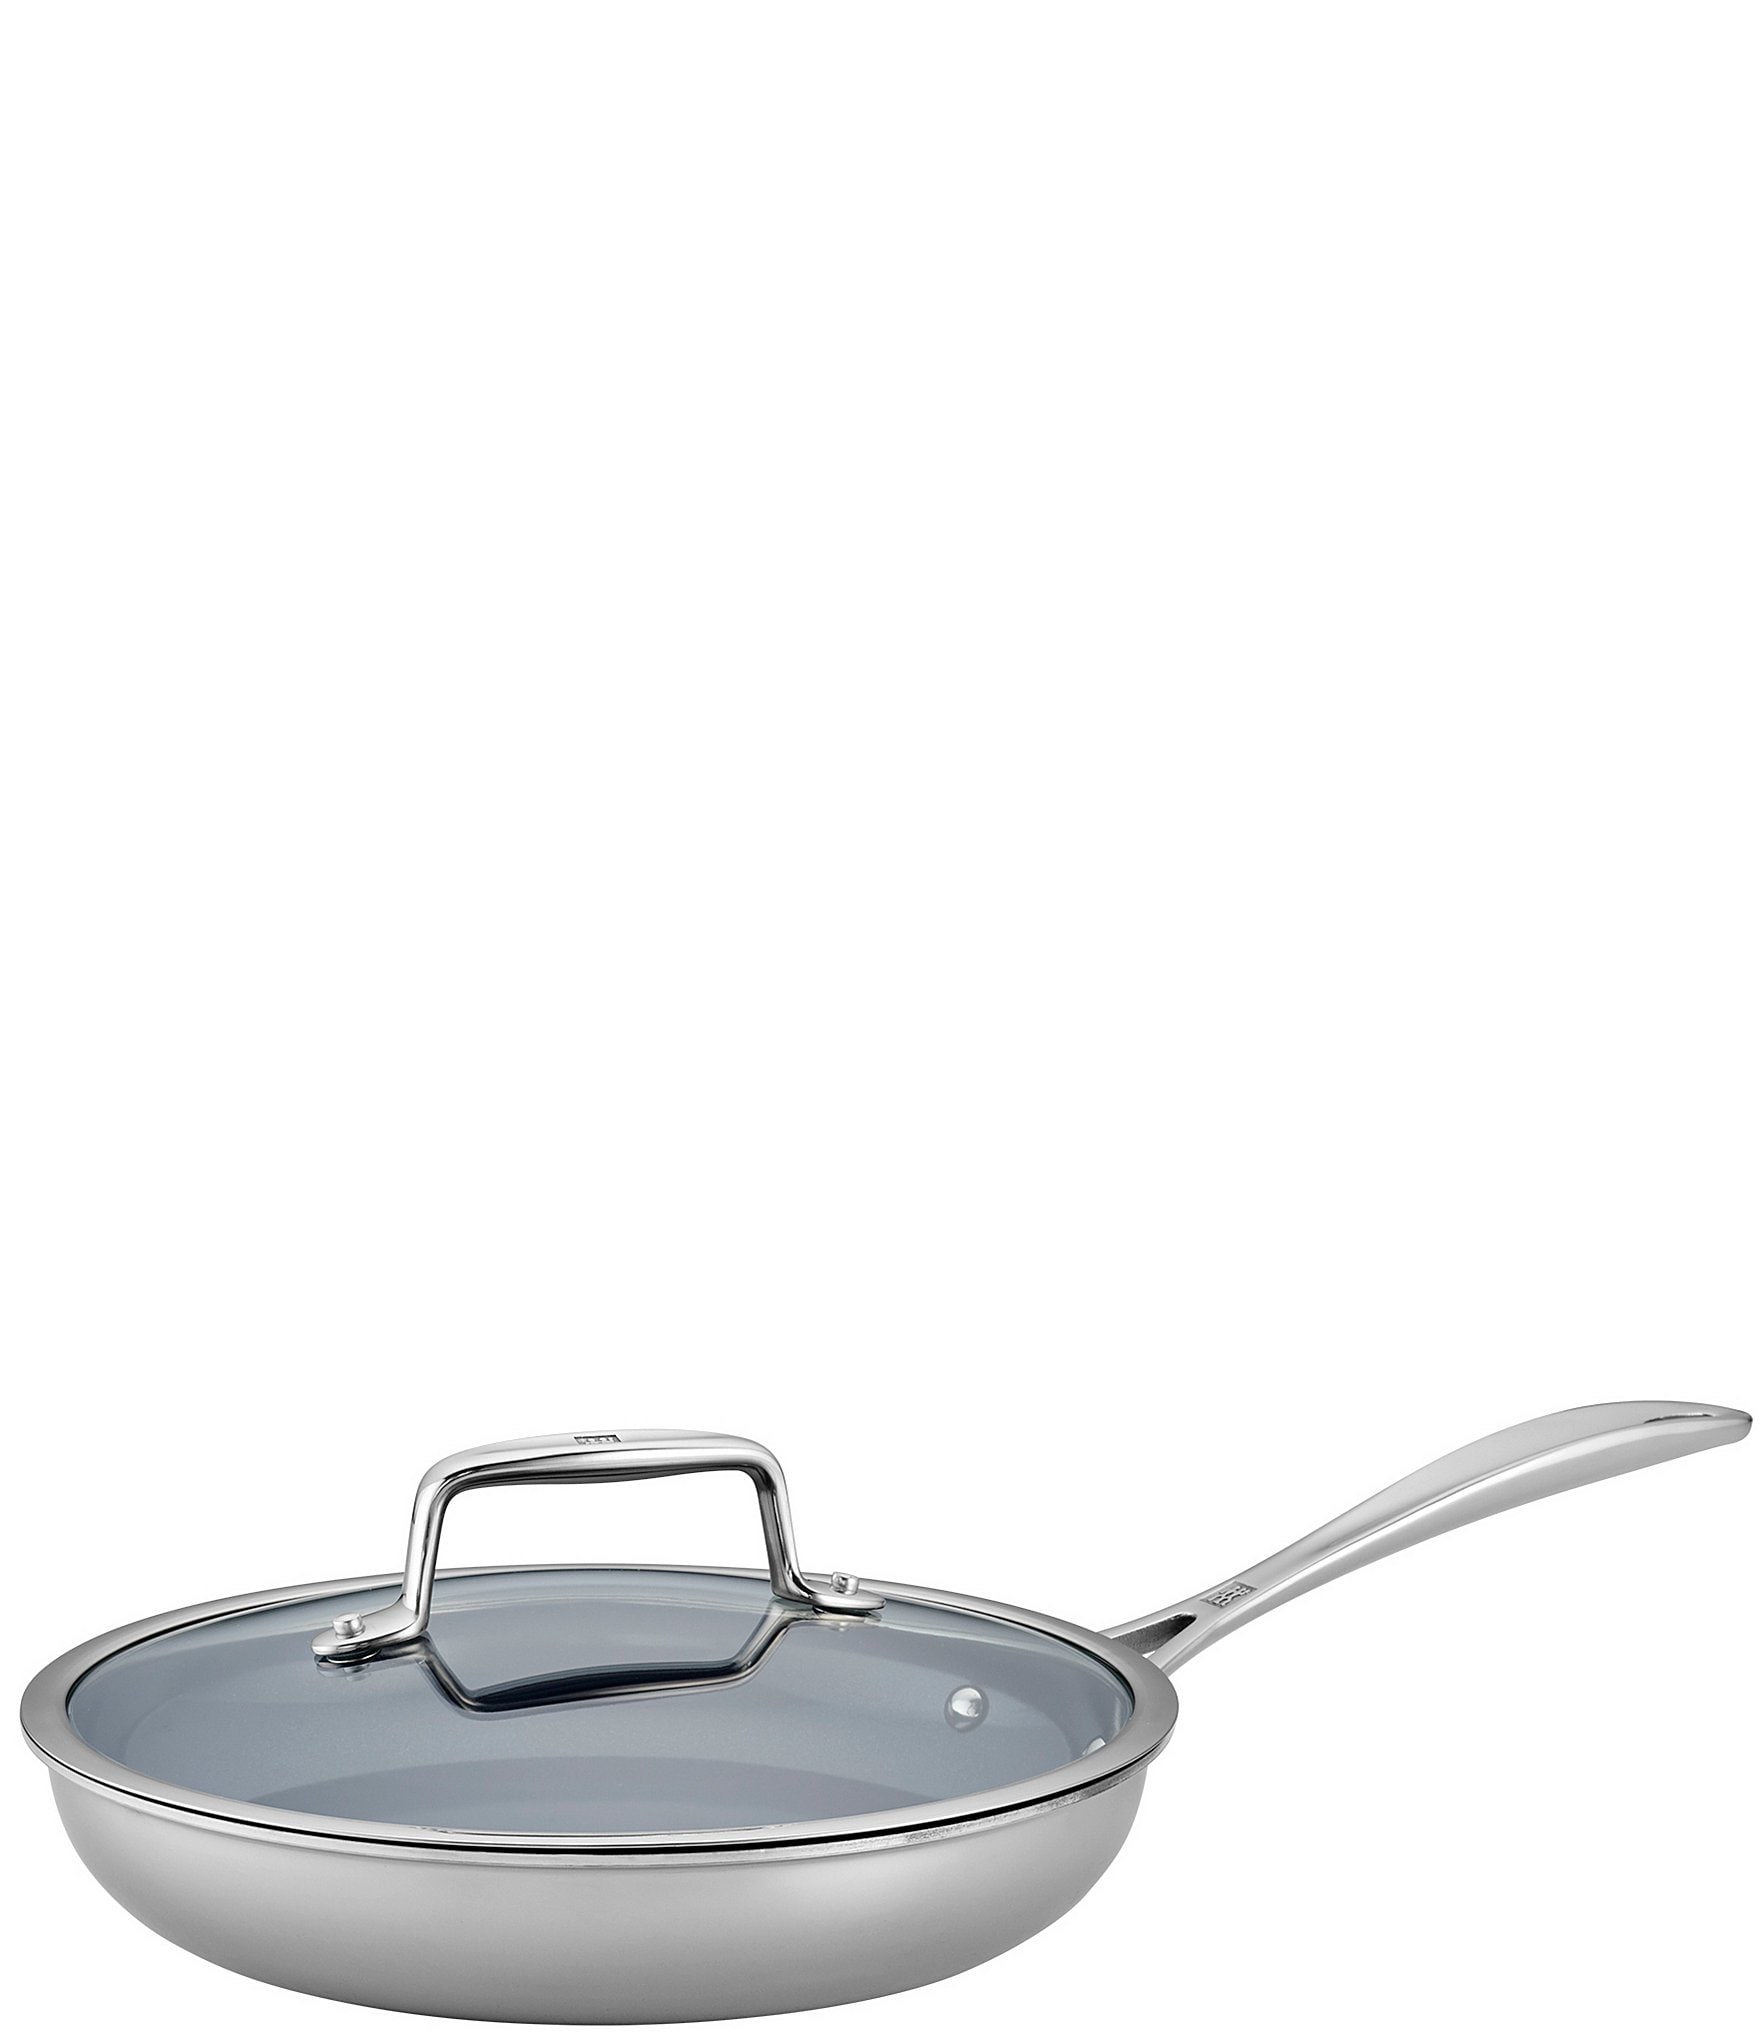 Zwilling Clad CFX Stainless Steel Ceramic Nonstick 9.5 Fry Pan with Lid